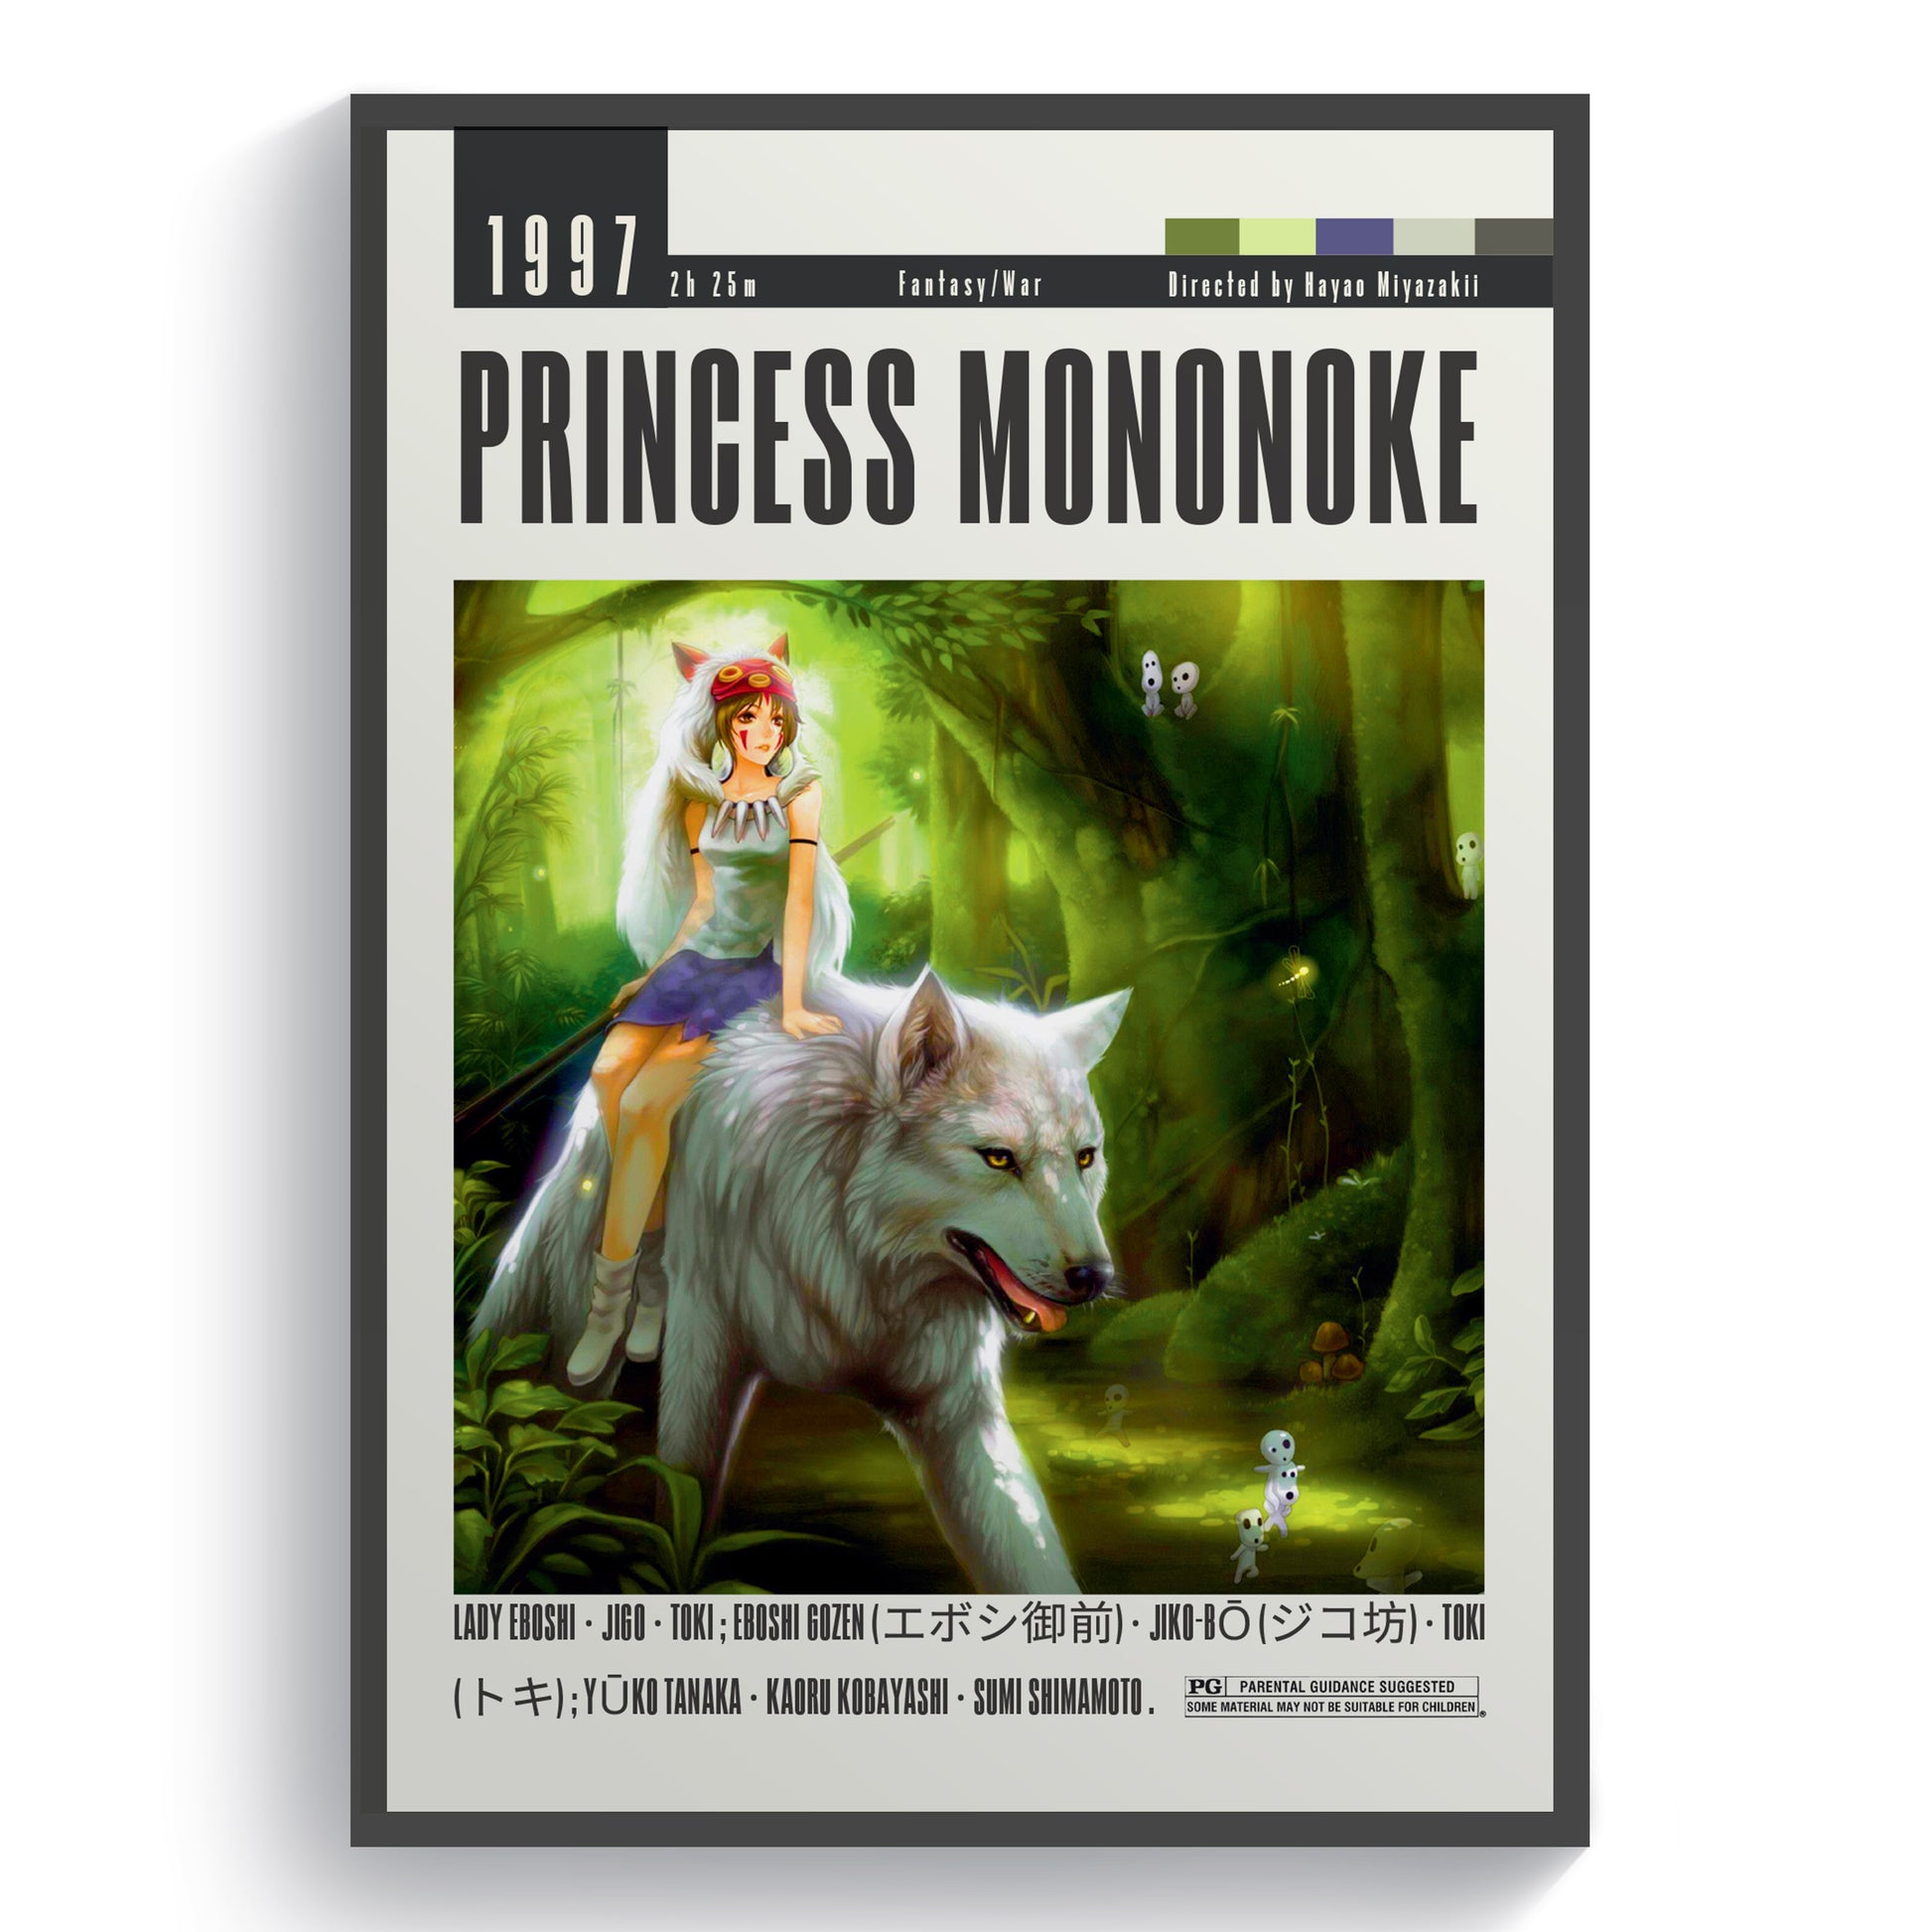 Enhance your anime collection with these stunning Princess Mononoke movie posters. Featuring classic designs, these high-quality posters are sure to impress any fan. Perfect for adding a touch of nostalgia to your home decor or for displaying your love for the beloved film. Bring home a piece of the magic today.